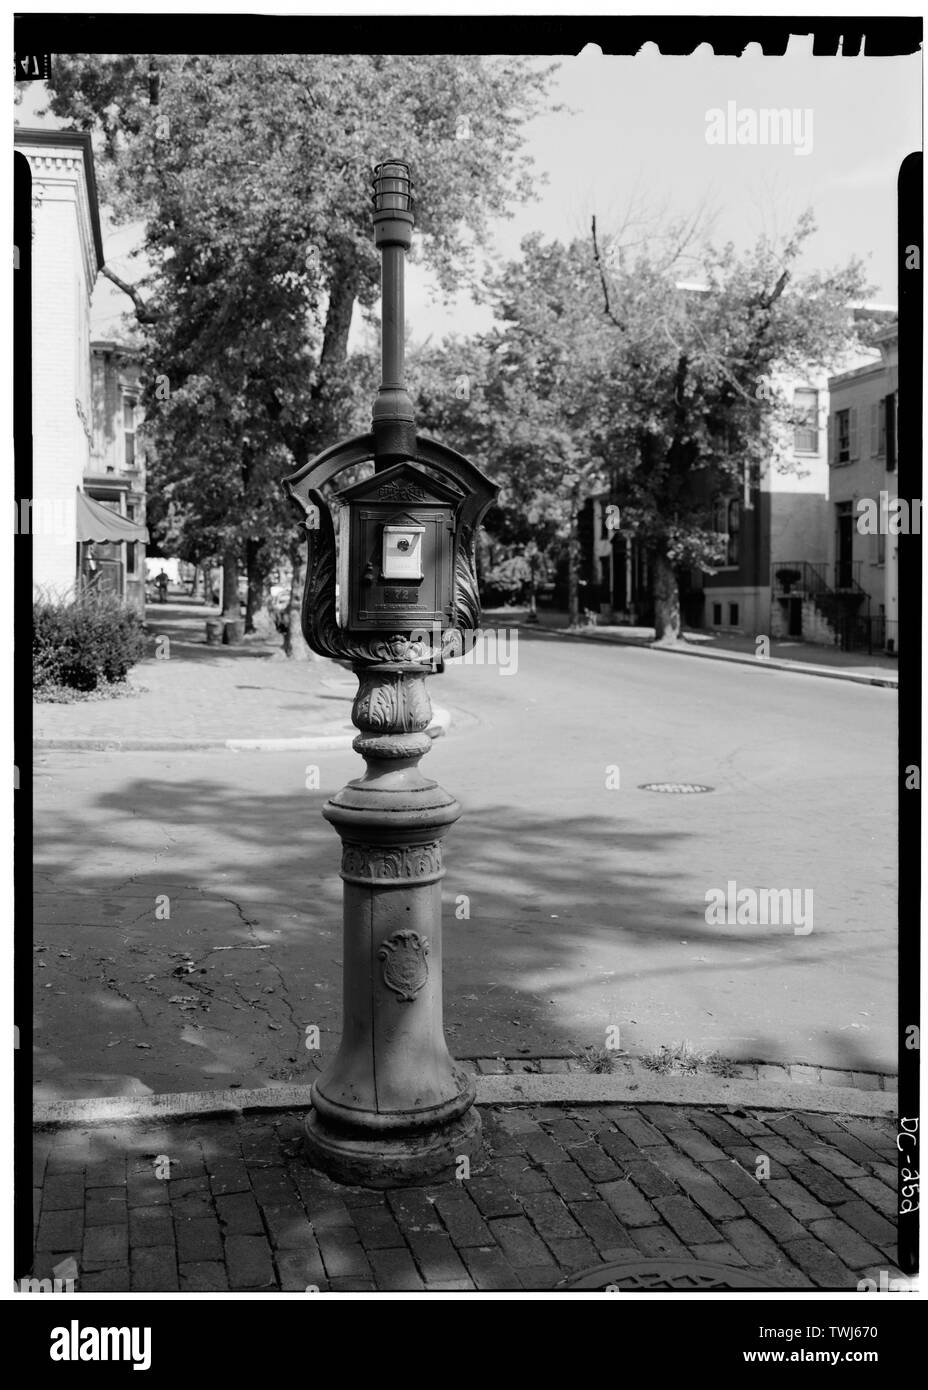 September 1969 FIRE DEPARTMENT CALL BOX S. W. CORNER 28th AND O STREETS, N.W. - Georgetown Street Furniture, Georgetown Vicinity, Washington, District of Columbia, DC Stock Photo